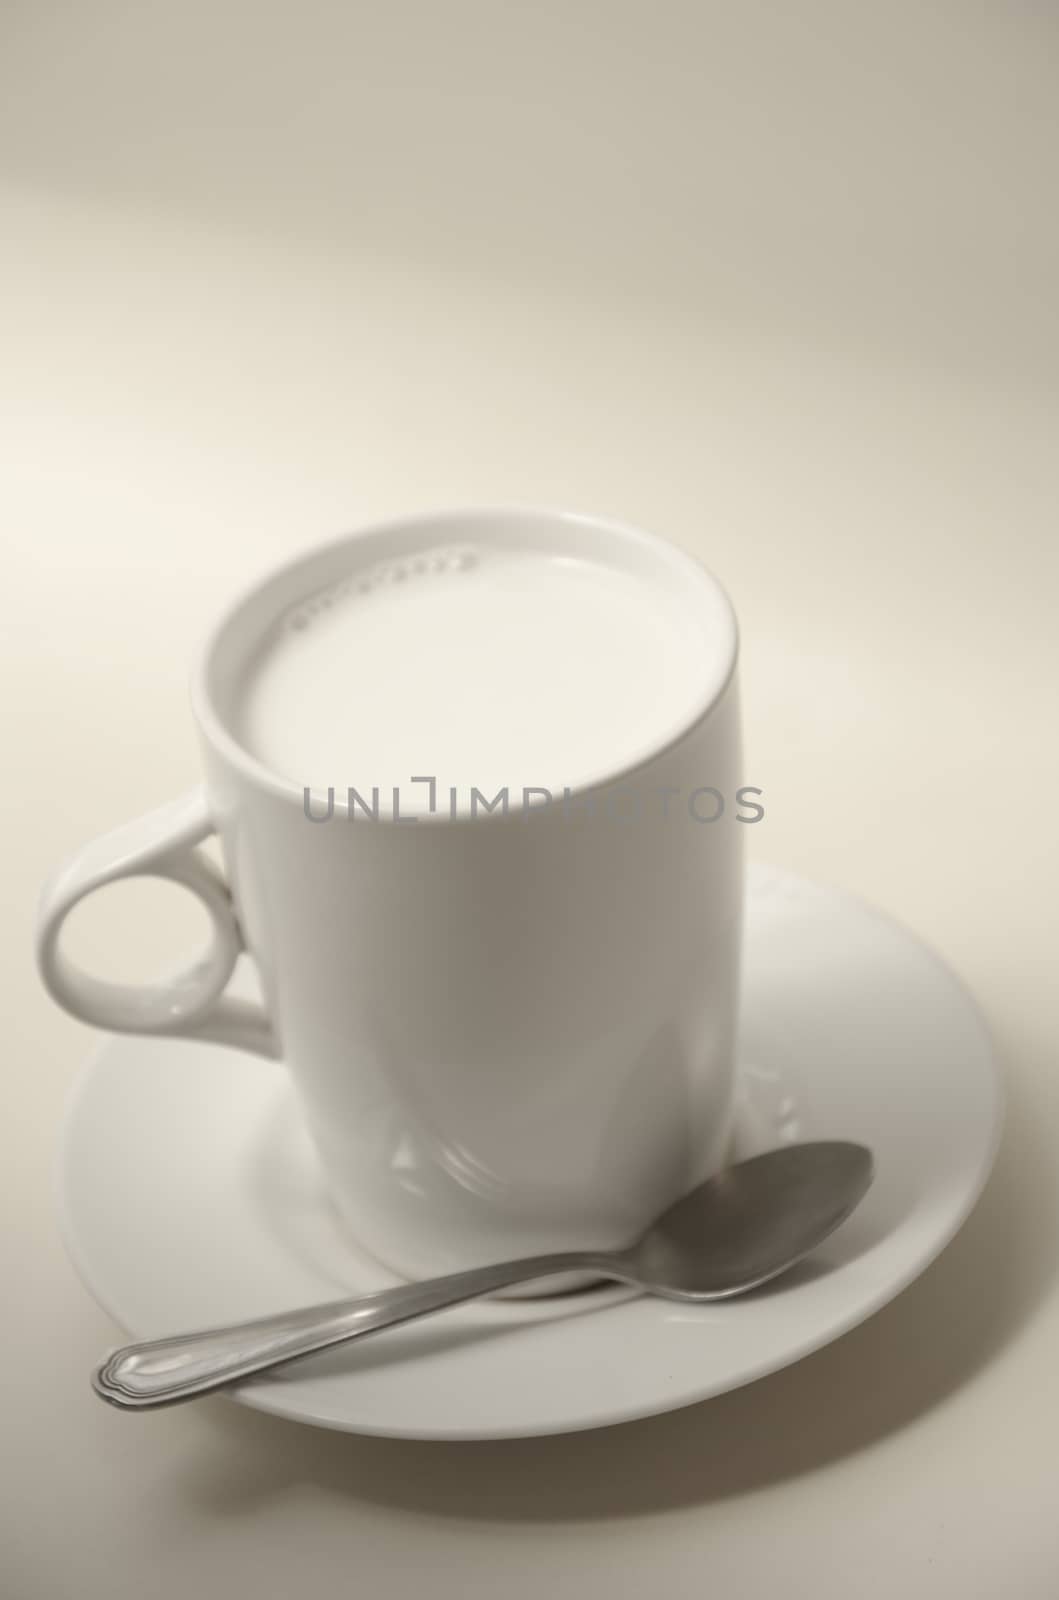 Hot milk cup on table